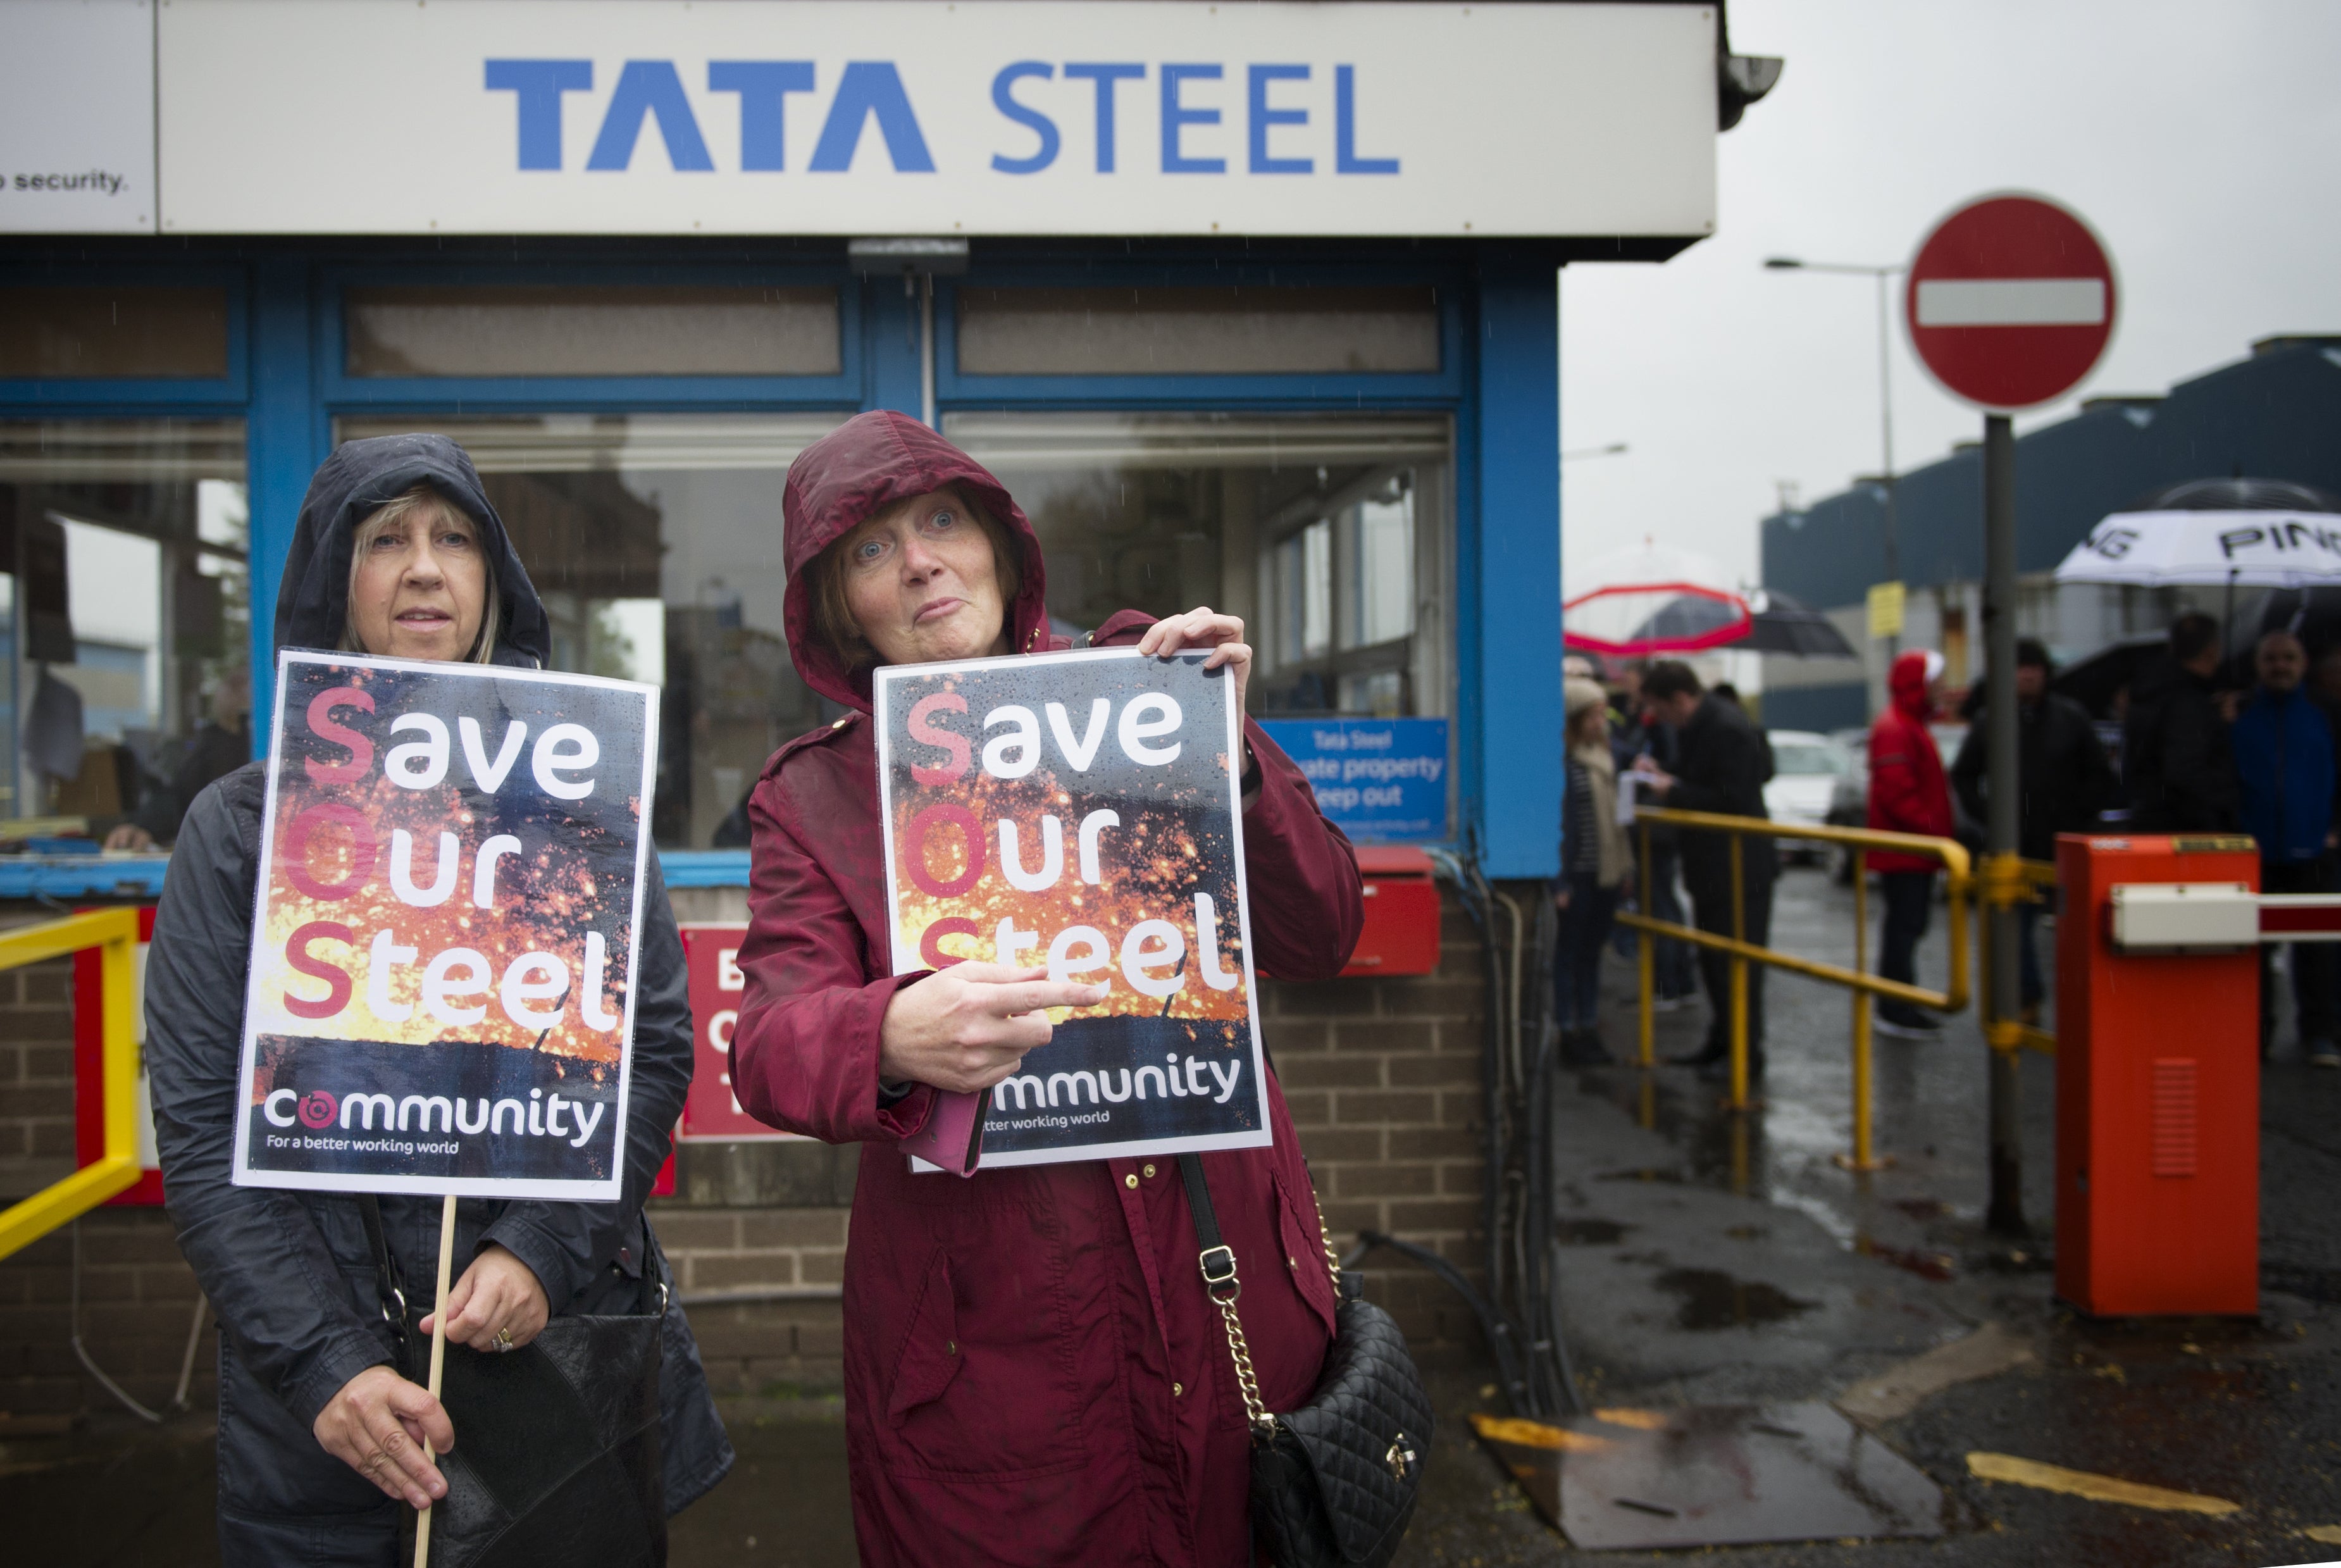 Previous owners Tata Steel had mothballed the site. (Jane Barlow/PA)